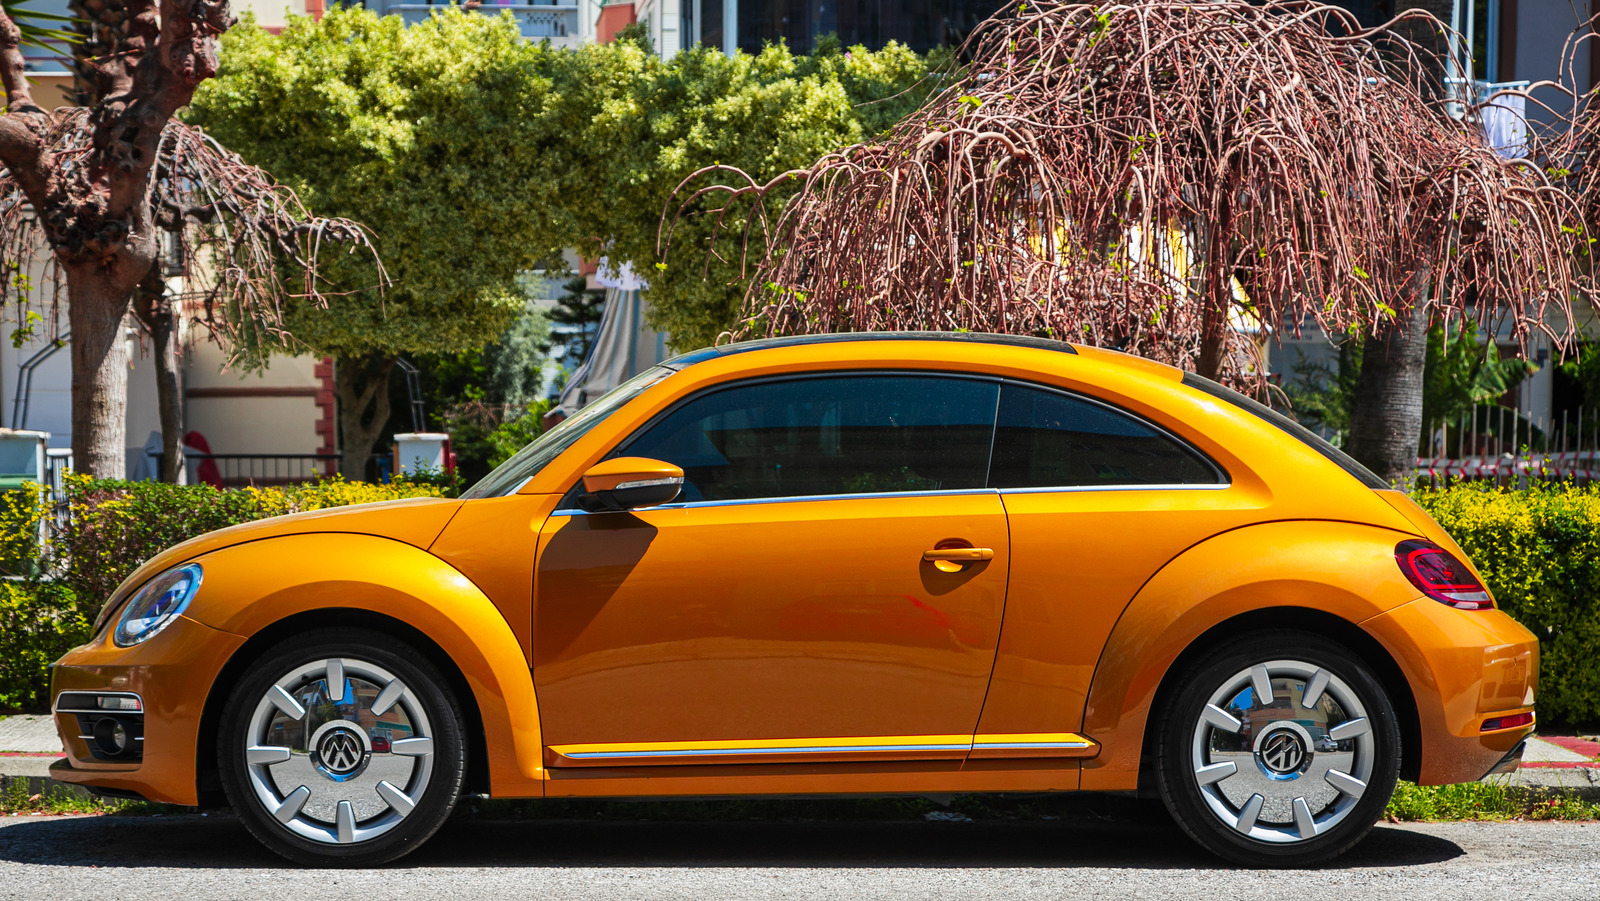 The Reason Why Volkswagen Discontinued The Beetle